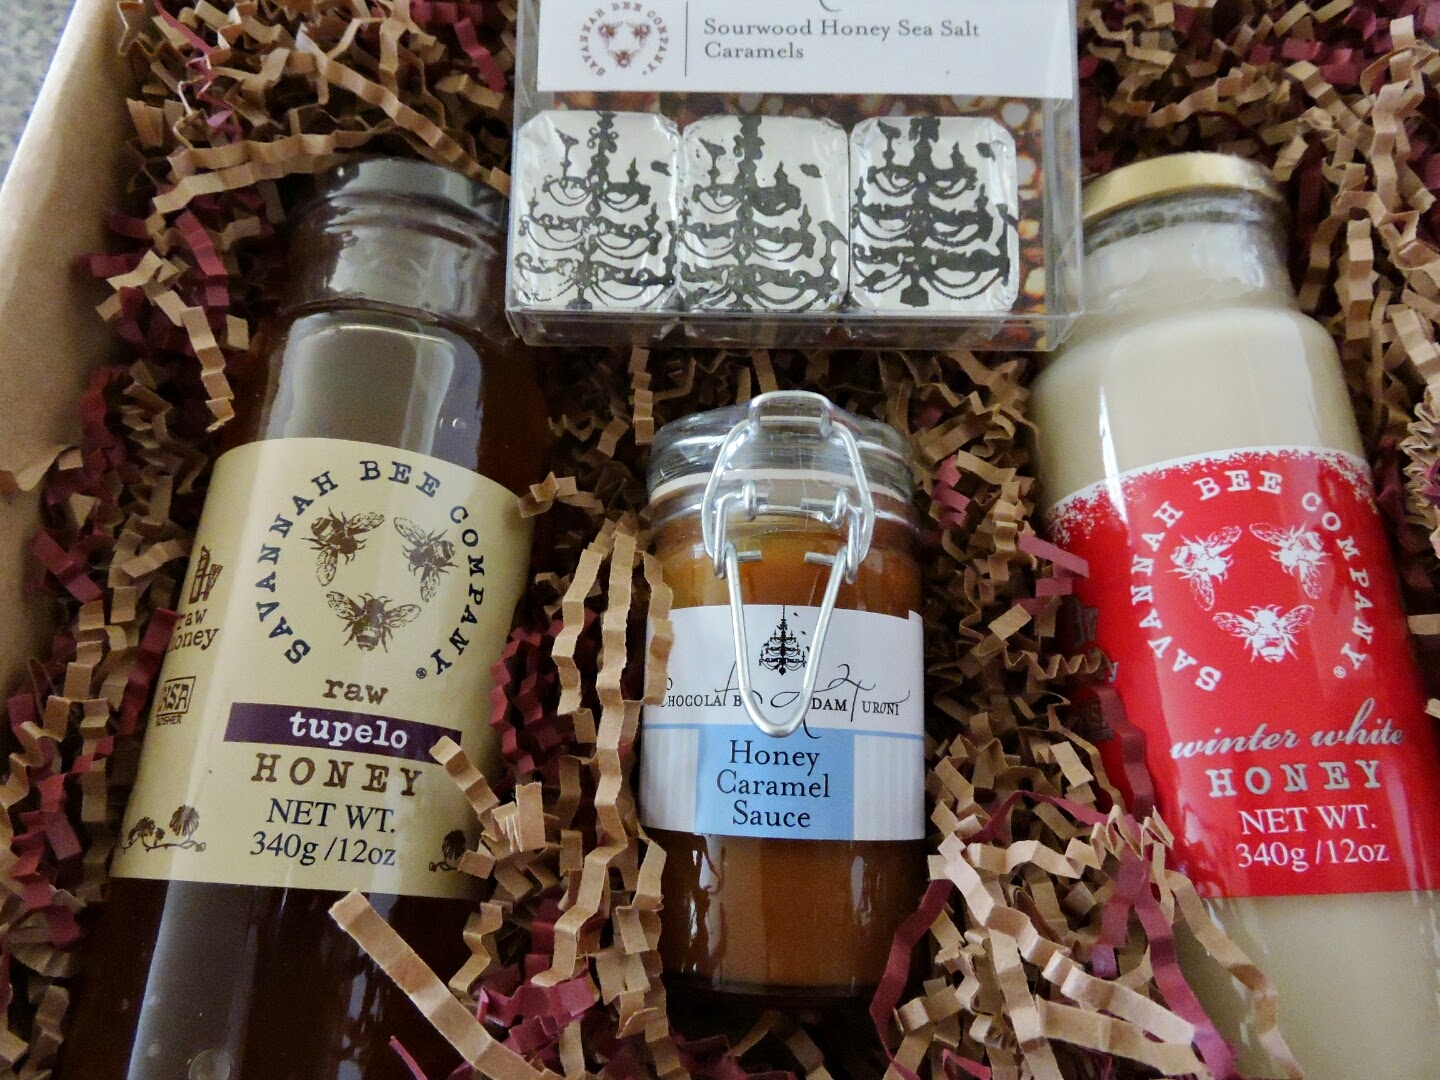 Savannah Bee Company Review and Giveaway Ends 2/12 via www.productreviewmom.com